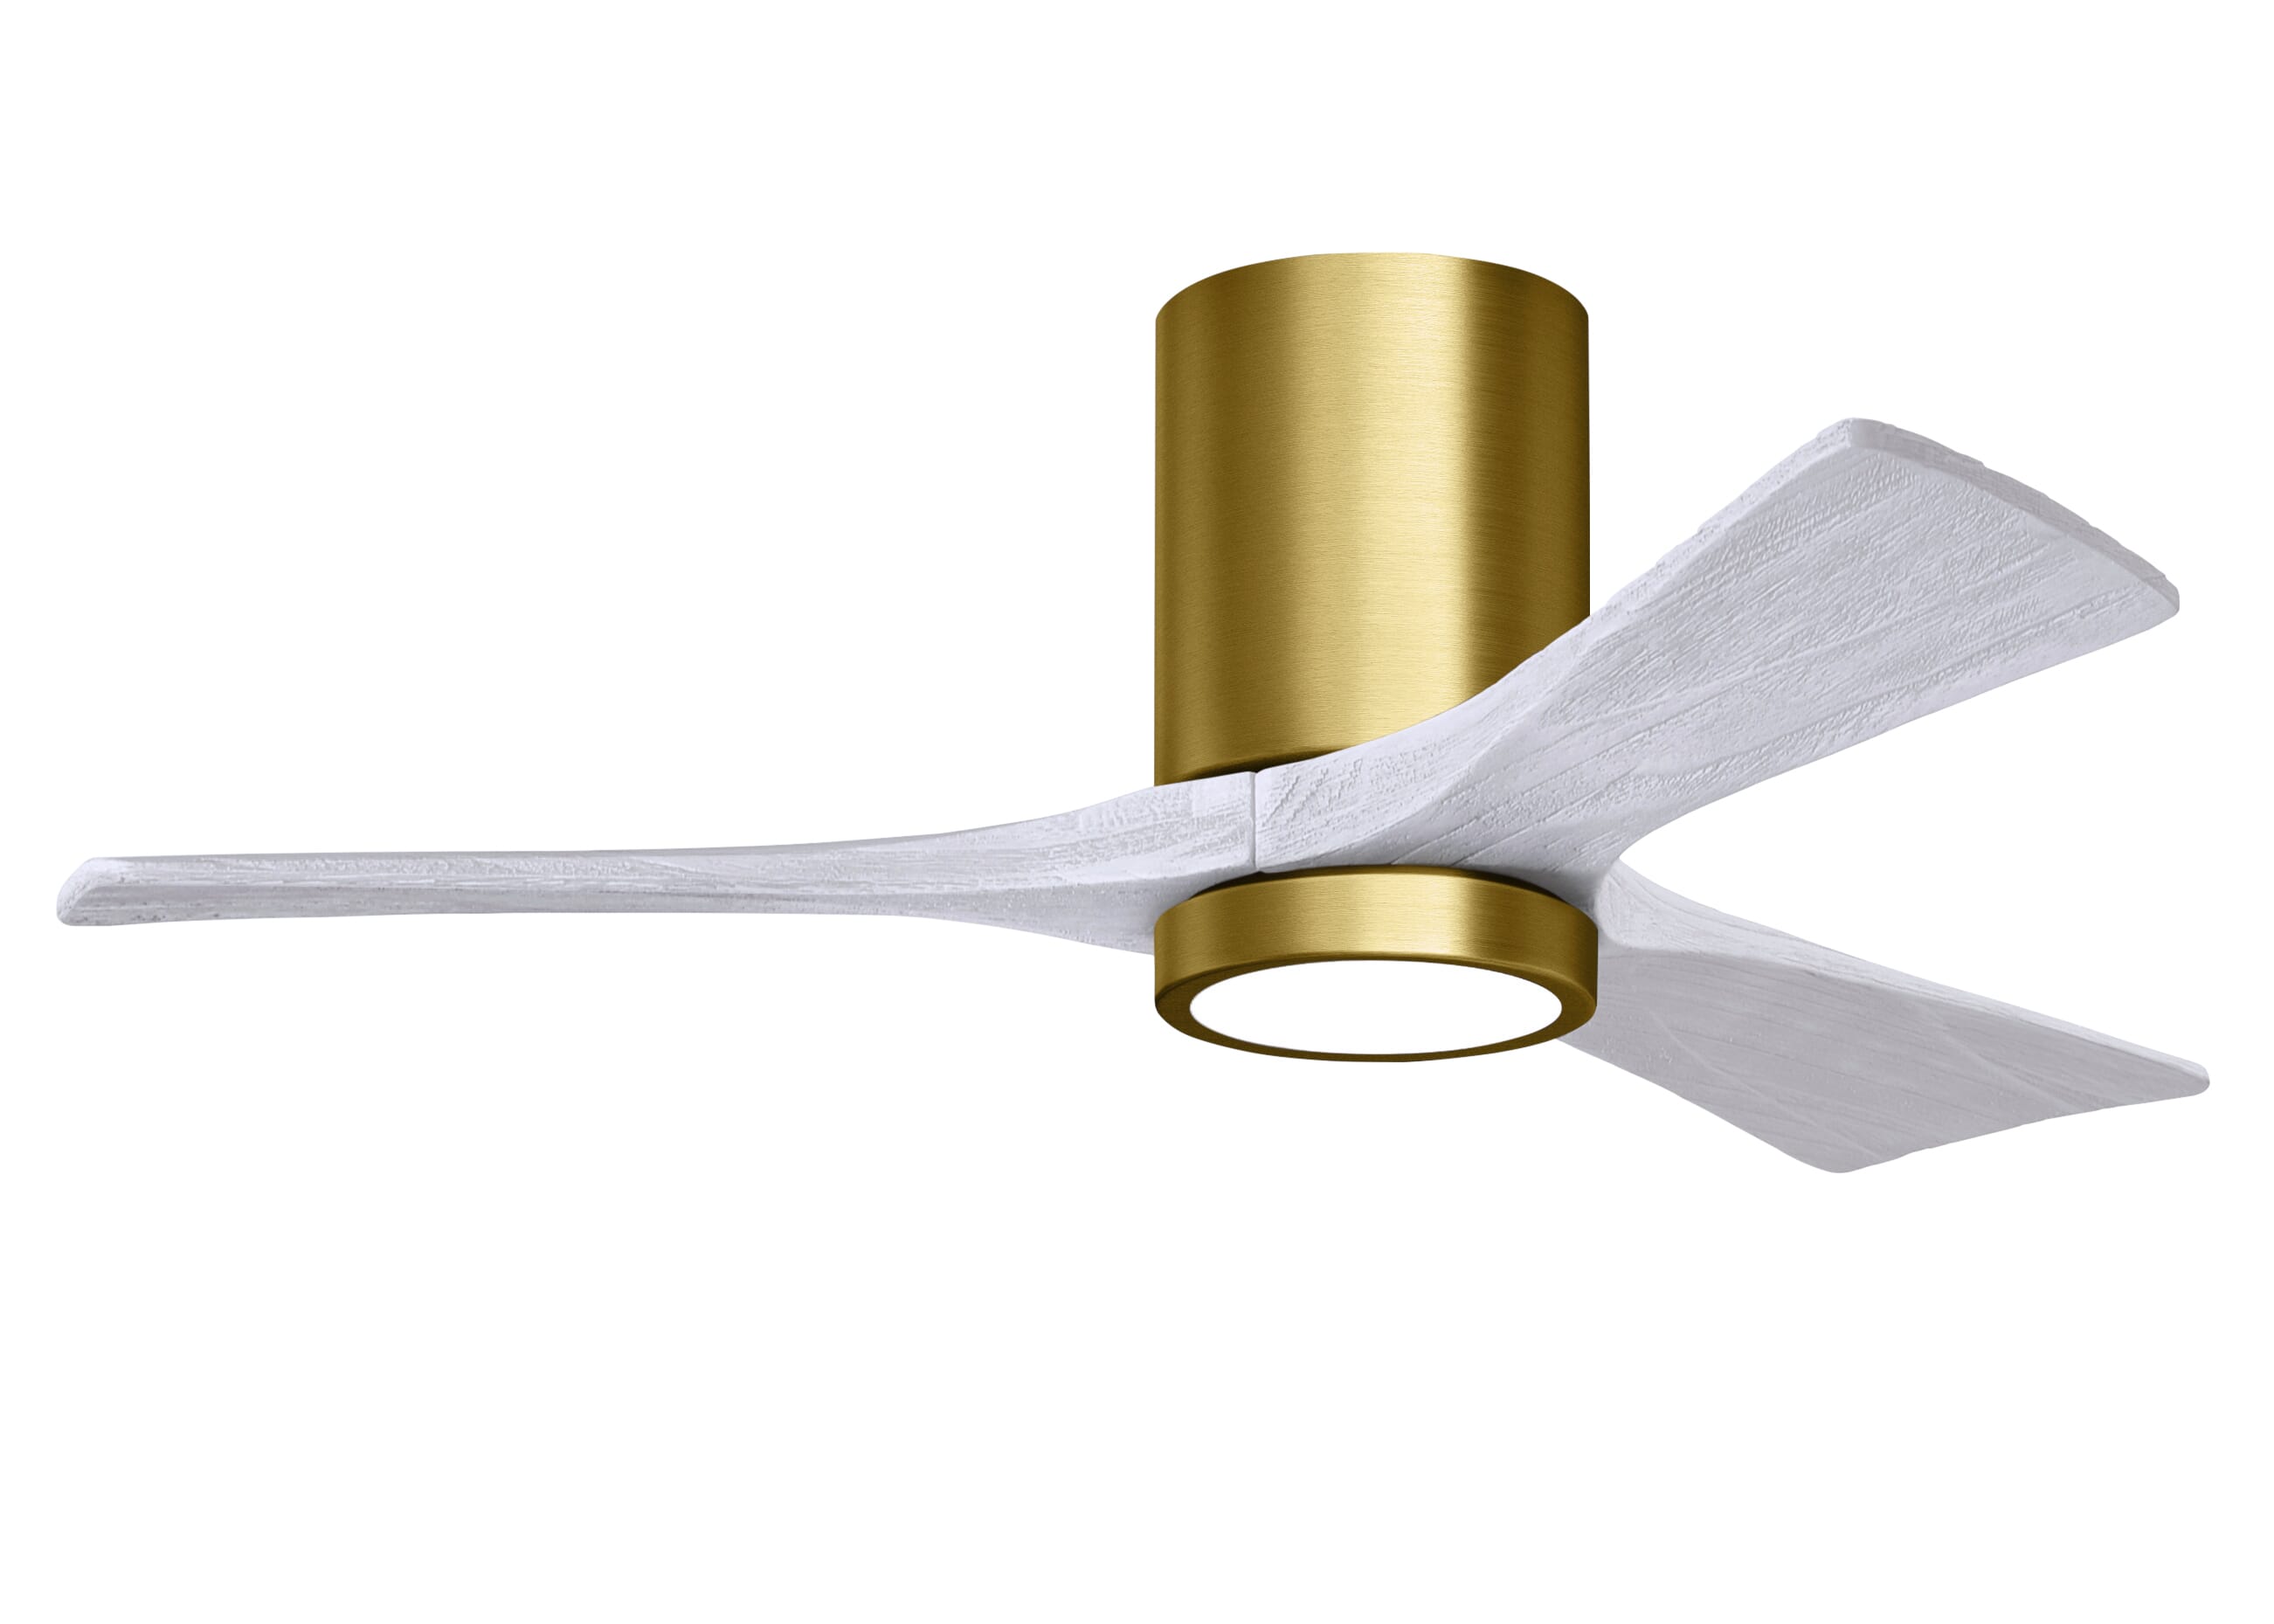 Irene 6-Speed DC 42"" Ceiling Fan w/ Integrated Light Kit in Brushed Brass with Matte White blades -  Matthews Fan Company, IR3HLK-BRBR-MWH-42